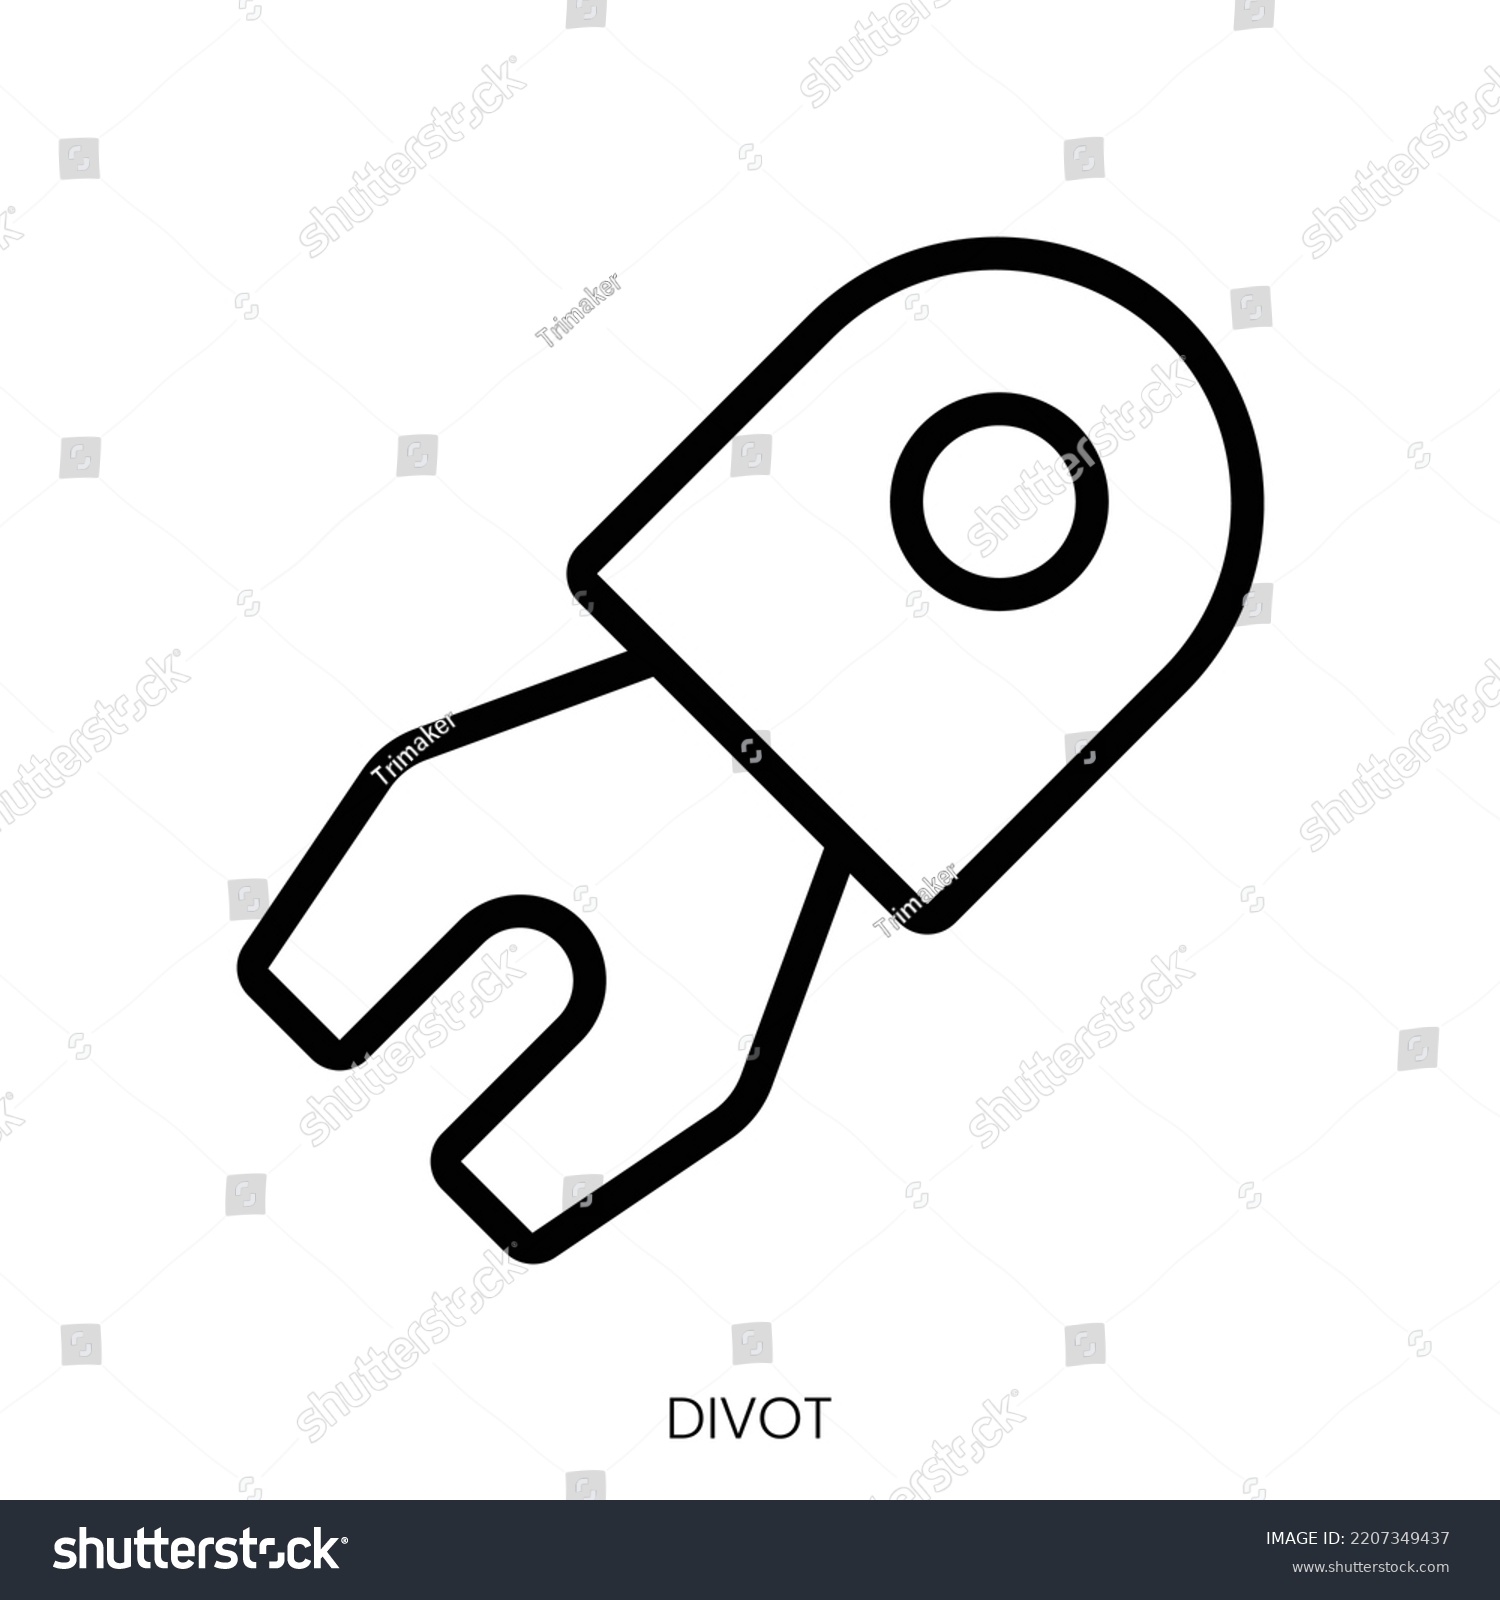 SVG of divot icon. Line Art Style Design Isolated On White Background svg